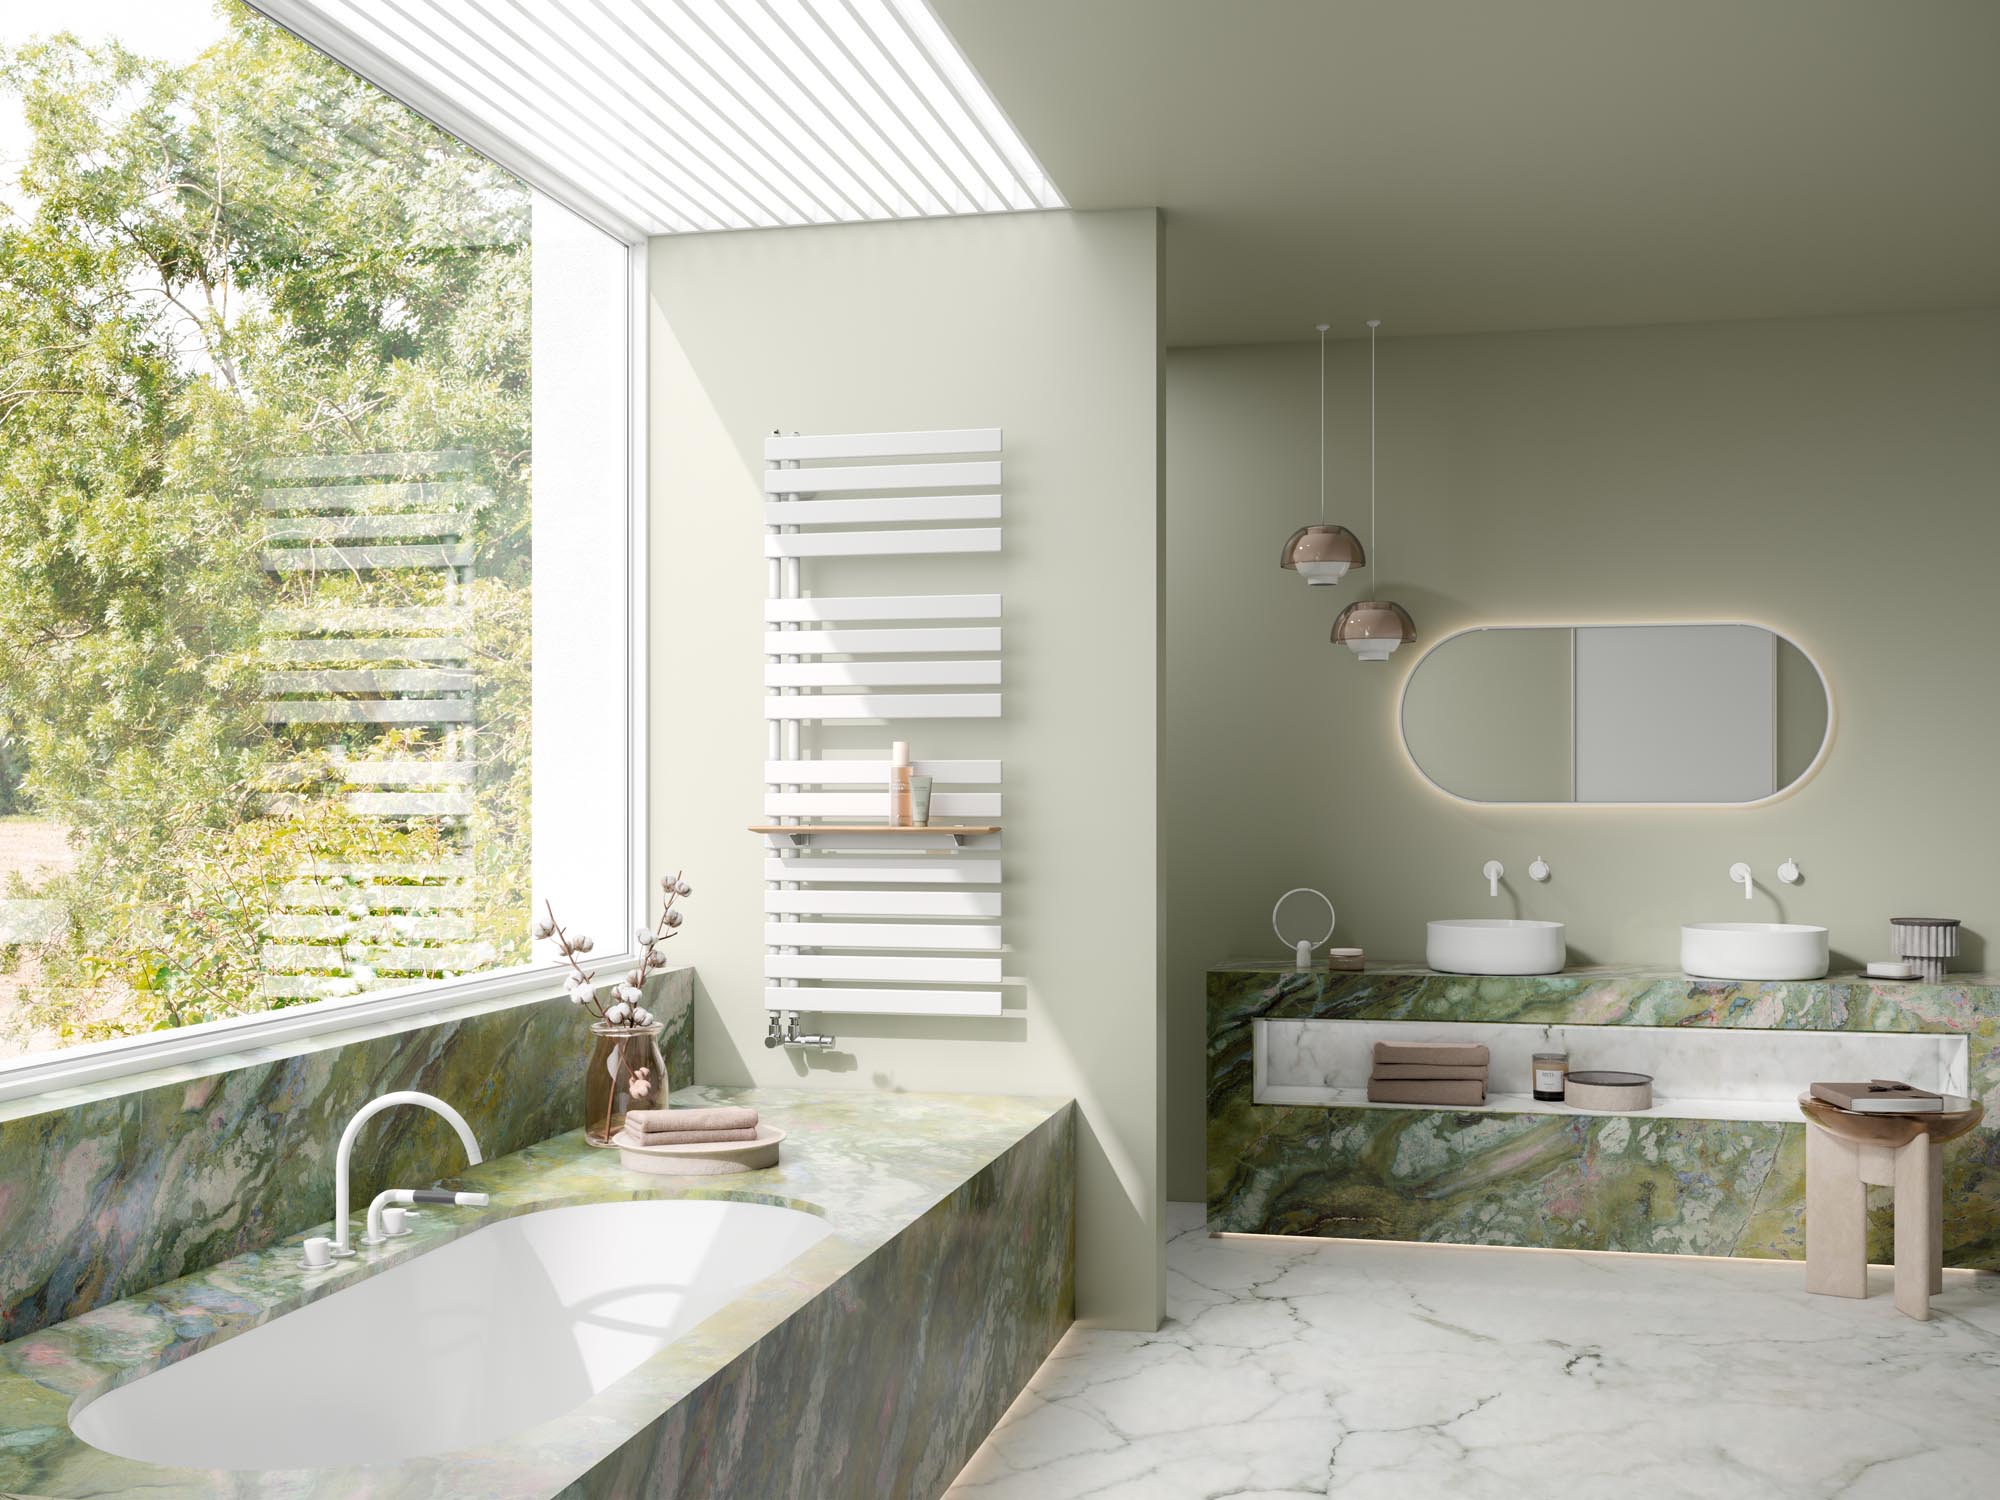 Kermi Credo Half flat designer and bathroom radiators – open at the side, with flat transverse pipes.